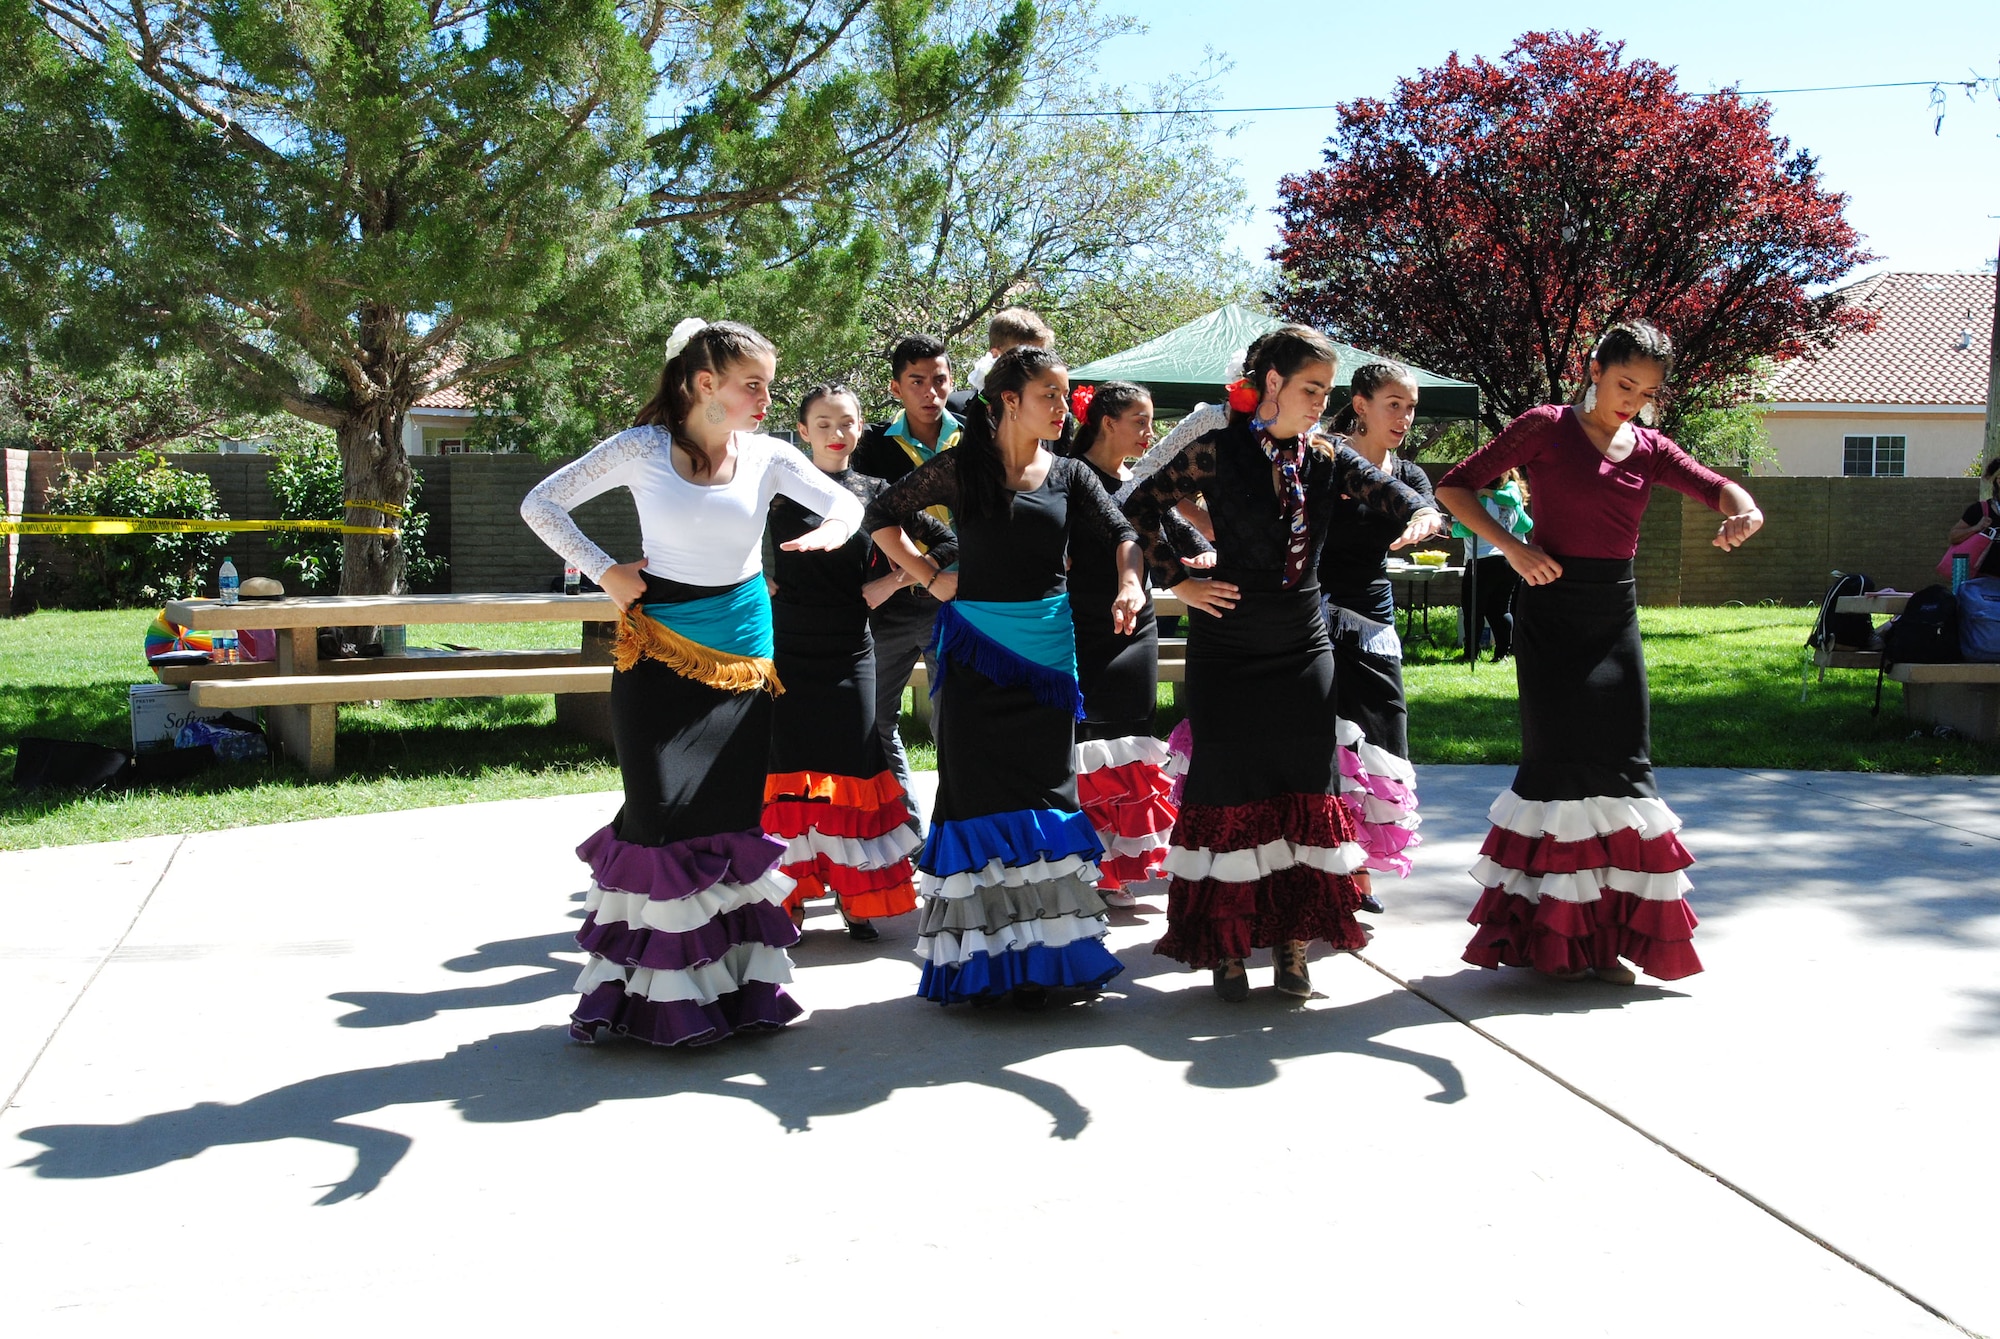 Flamingo dancers perform at the 2018 Hispanic Heritage Diversity Day event at Hardin Field here Sept. 27. This year's event featured the Al Hurricane Jr. Band with keynote speaker Albuquerque District Attorney Raul Torrez. There was also a car show, an art show, food trucks and a samba sizzle Latin dance workout. (U.S. Air Force photo by Jessie Perkins)